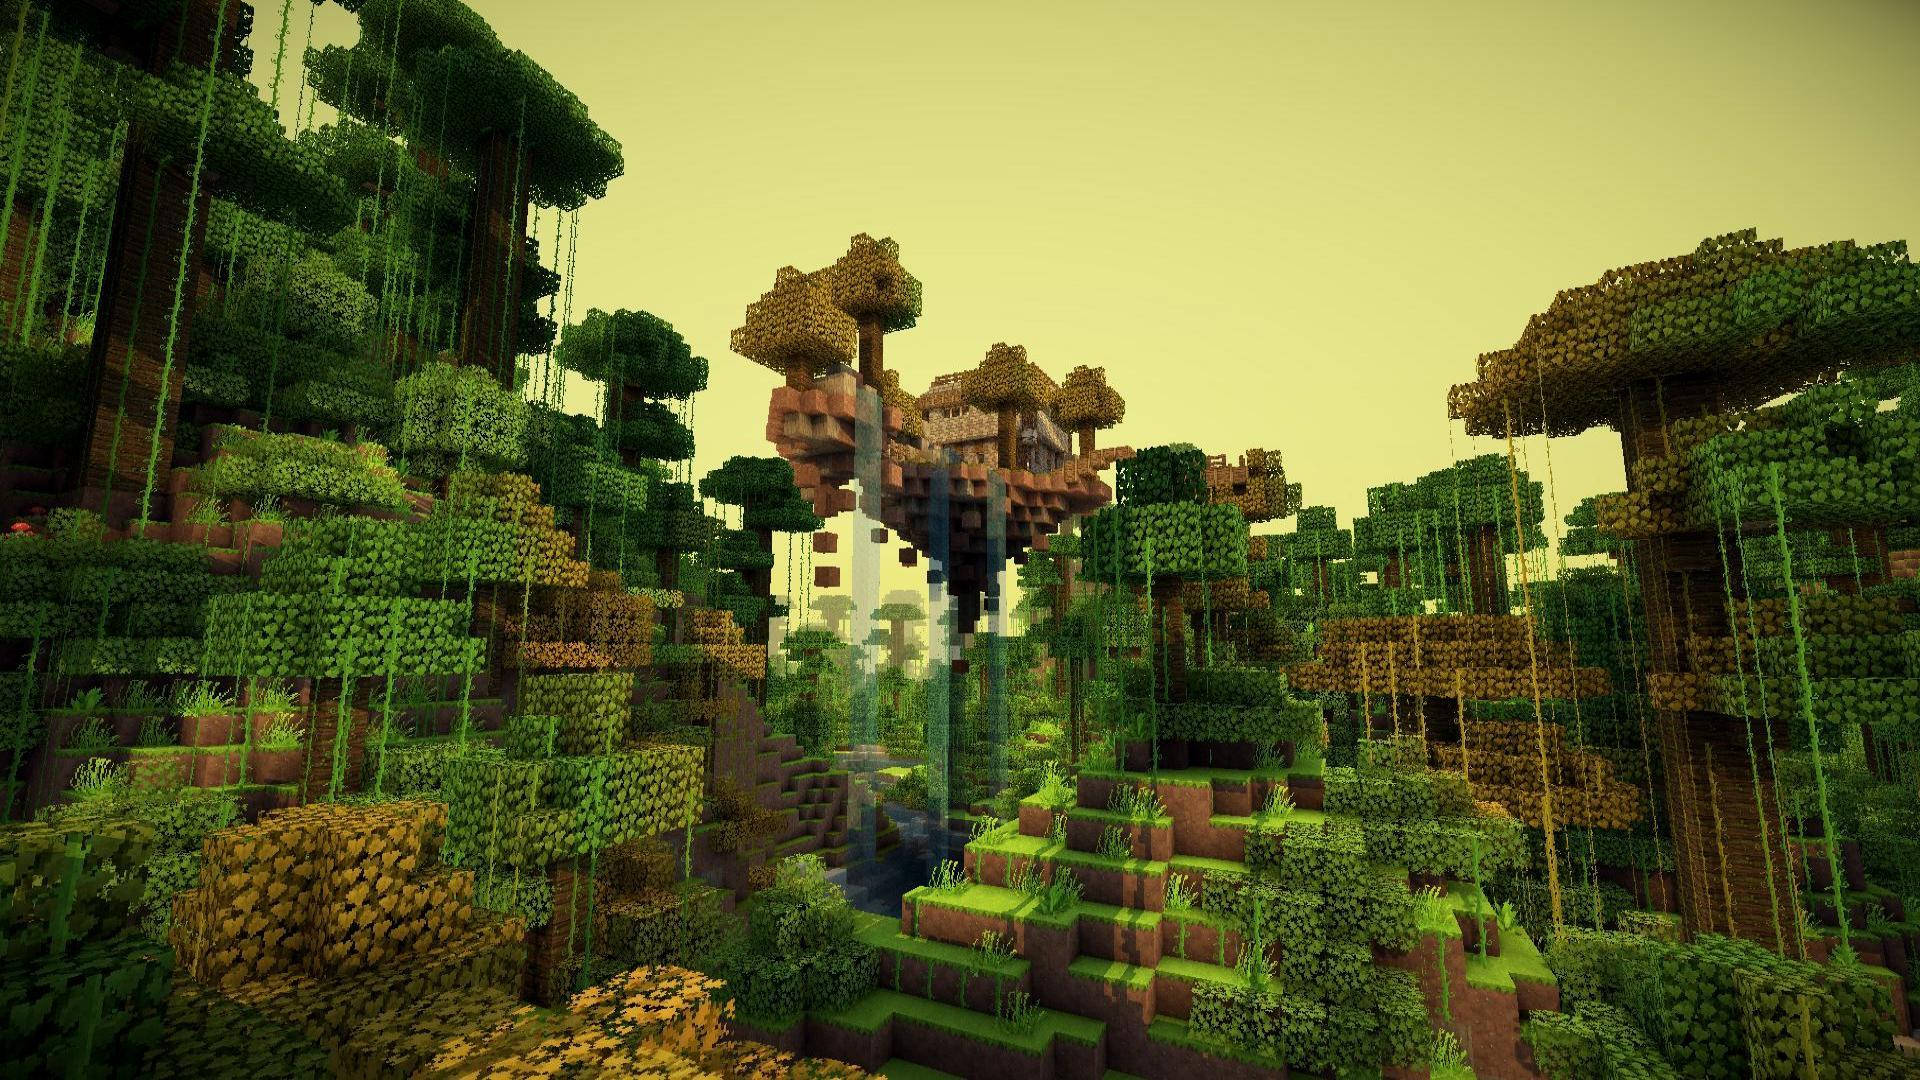 Forest Trees And Vines Minecraft Hd Wallpaper